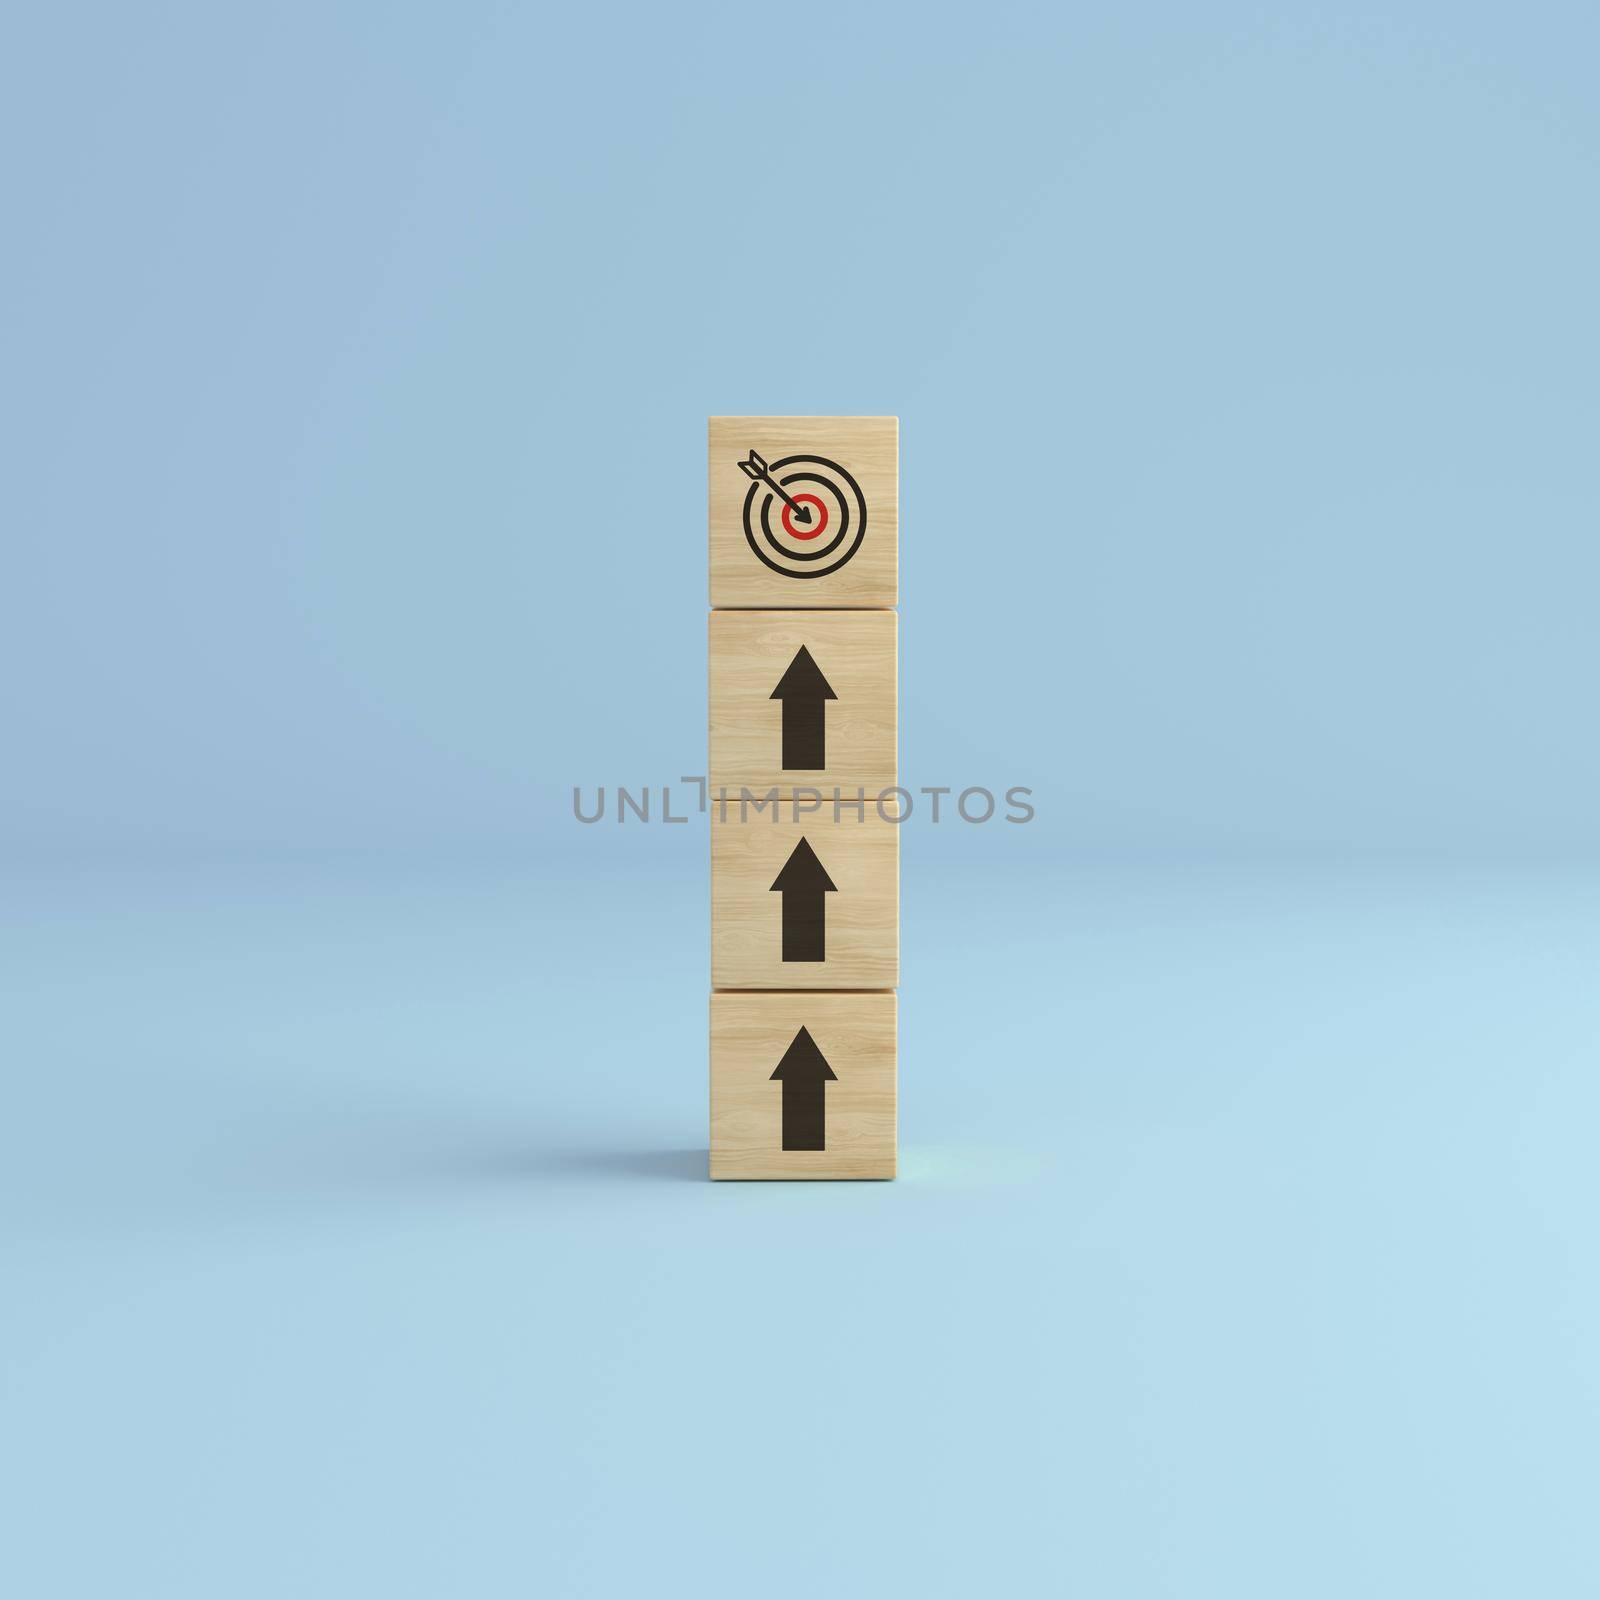 Target up. Arrow up with wooden cube blocks tower with target icon on white background. Concept of business strategy and action plan. 3D rendering.